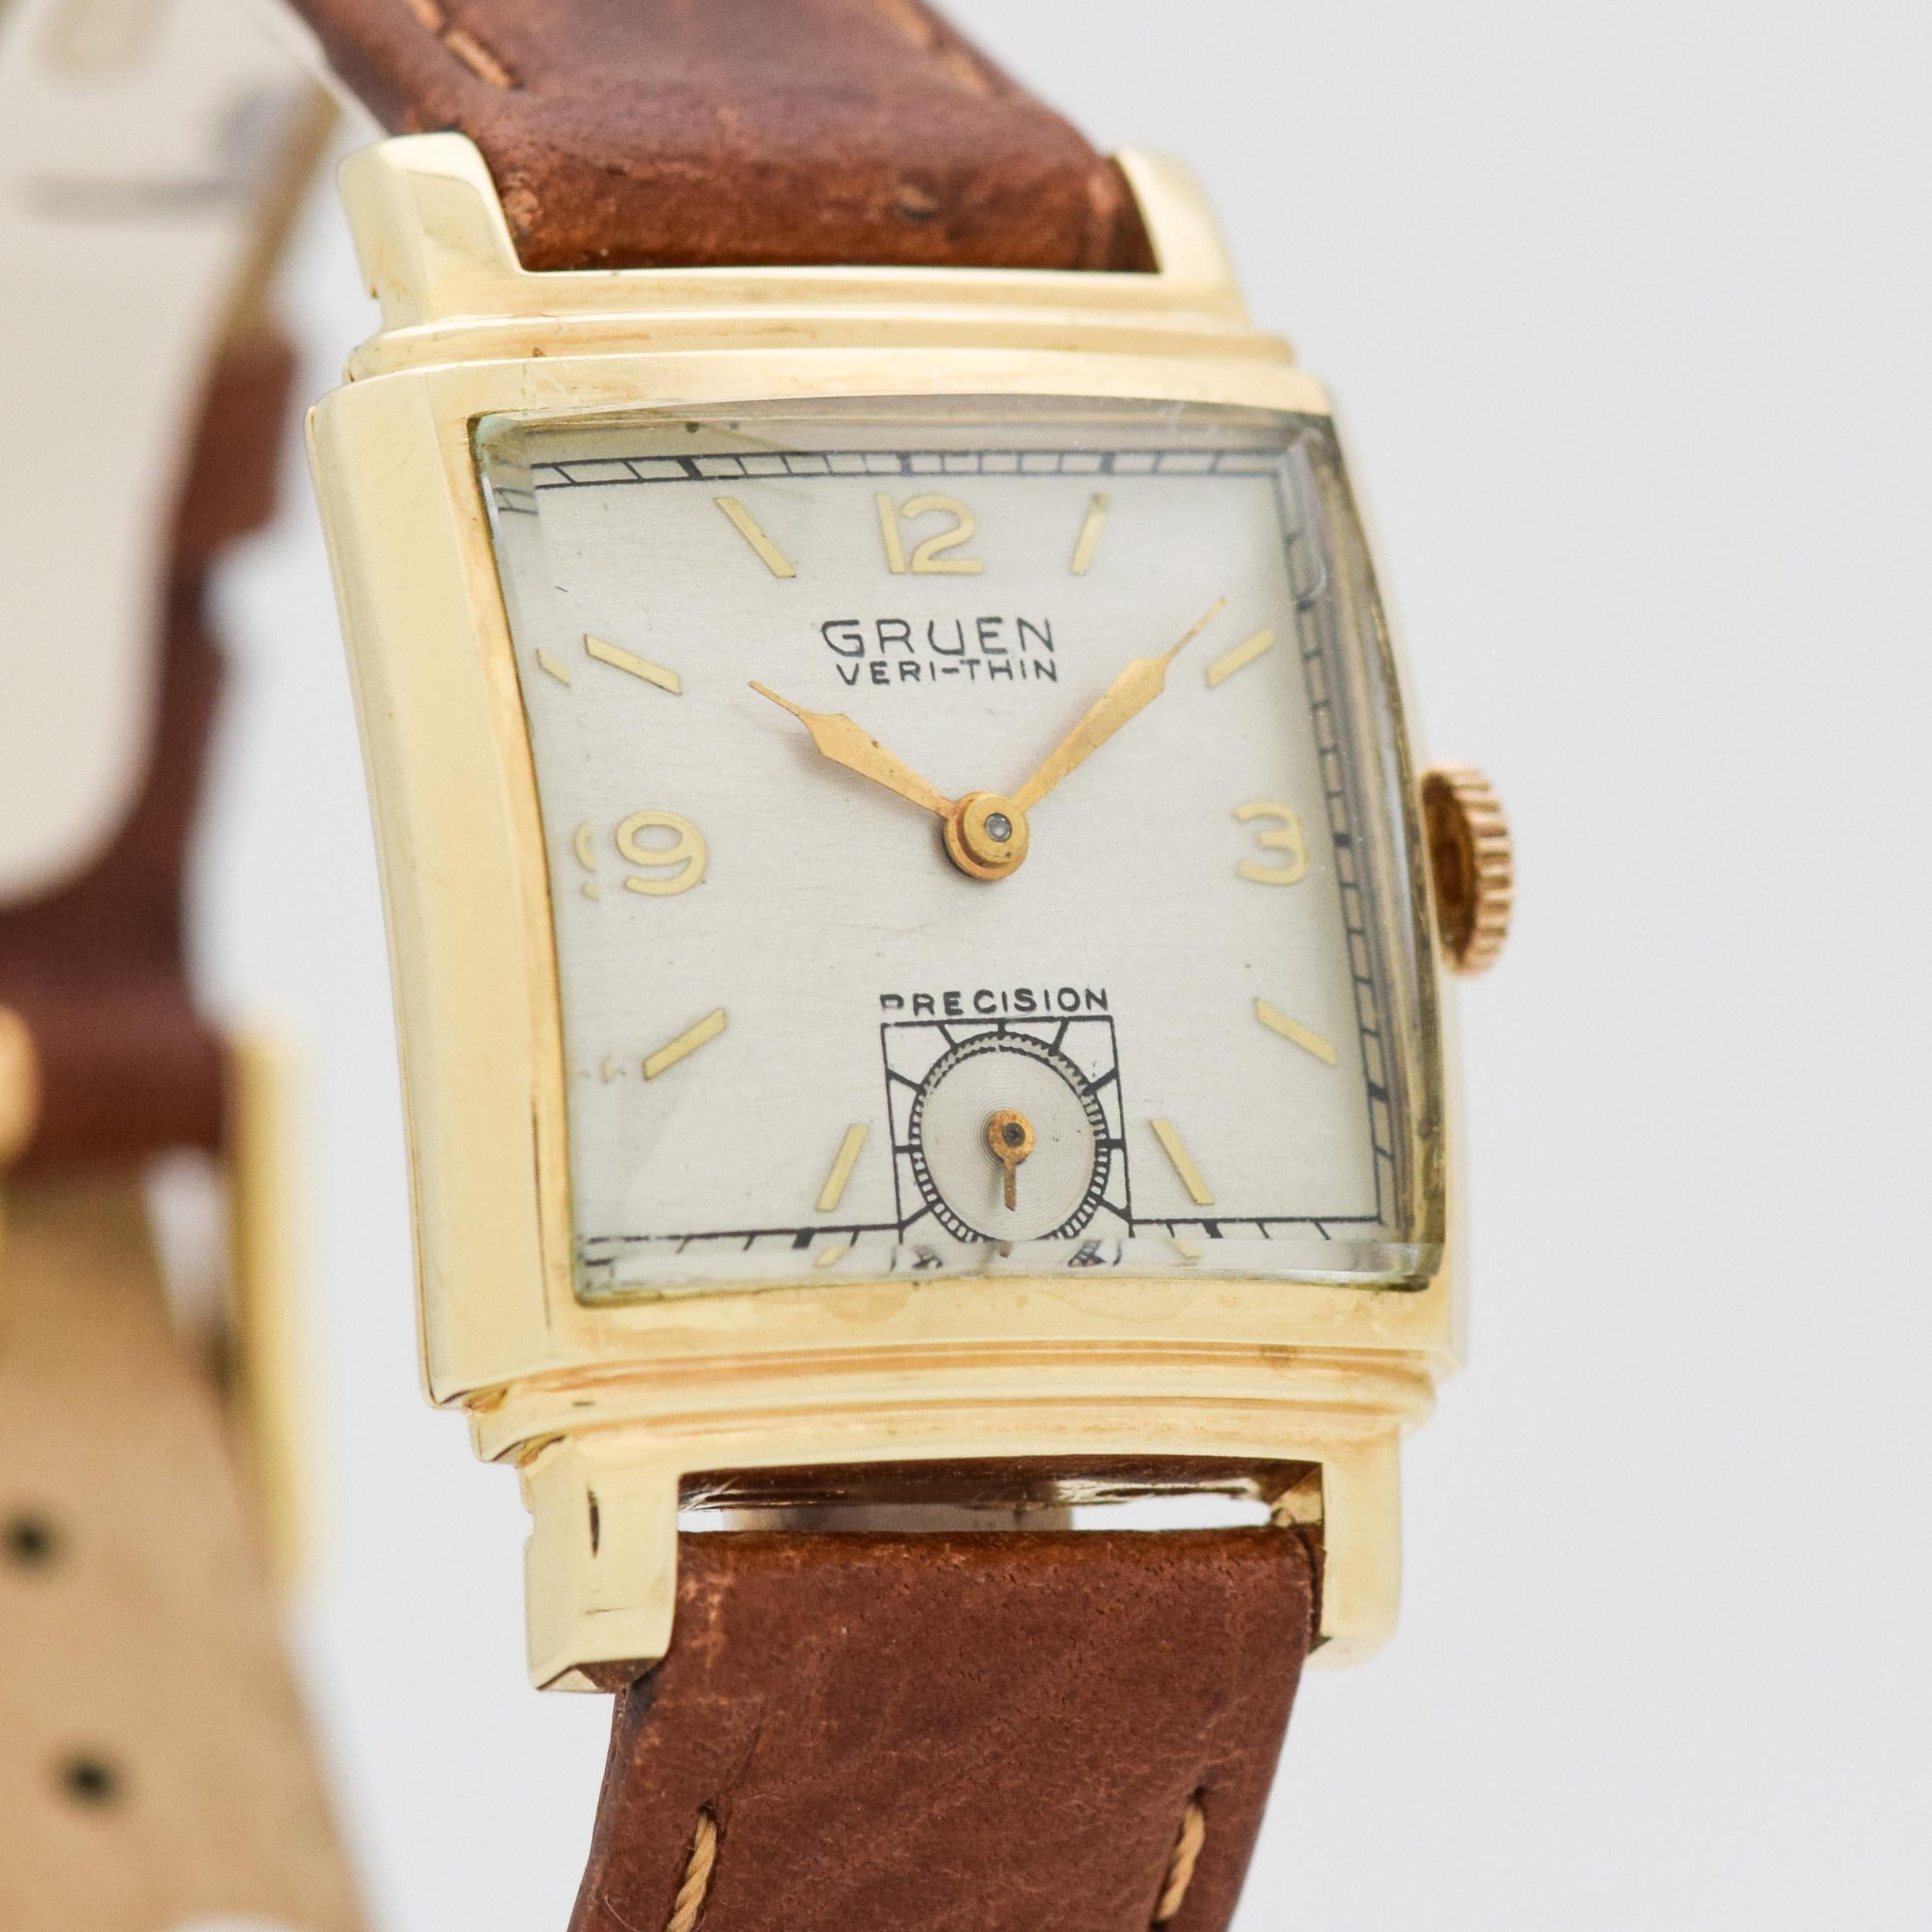 1947 Vintage Grue Veri-Thin Precision 14k Yellow Gold Stair Step Case watch with Silver Dial with Applied Gold Arabic 3, 9, and 12 with Stick/Bar/Baton Markers. 25mm x 35mm lug to lug (0.98 in. x 1.38 in.) - Powered by a 17-jewel, manual caliber